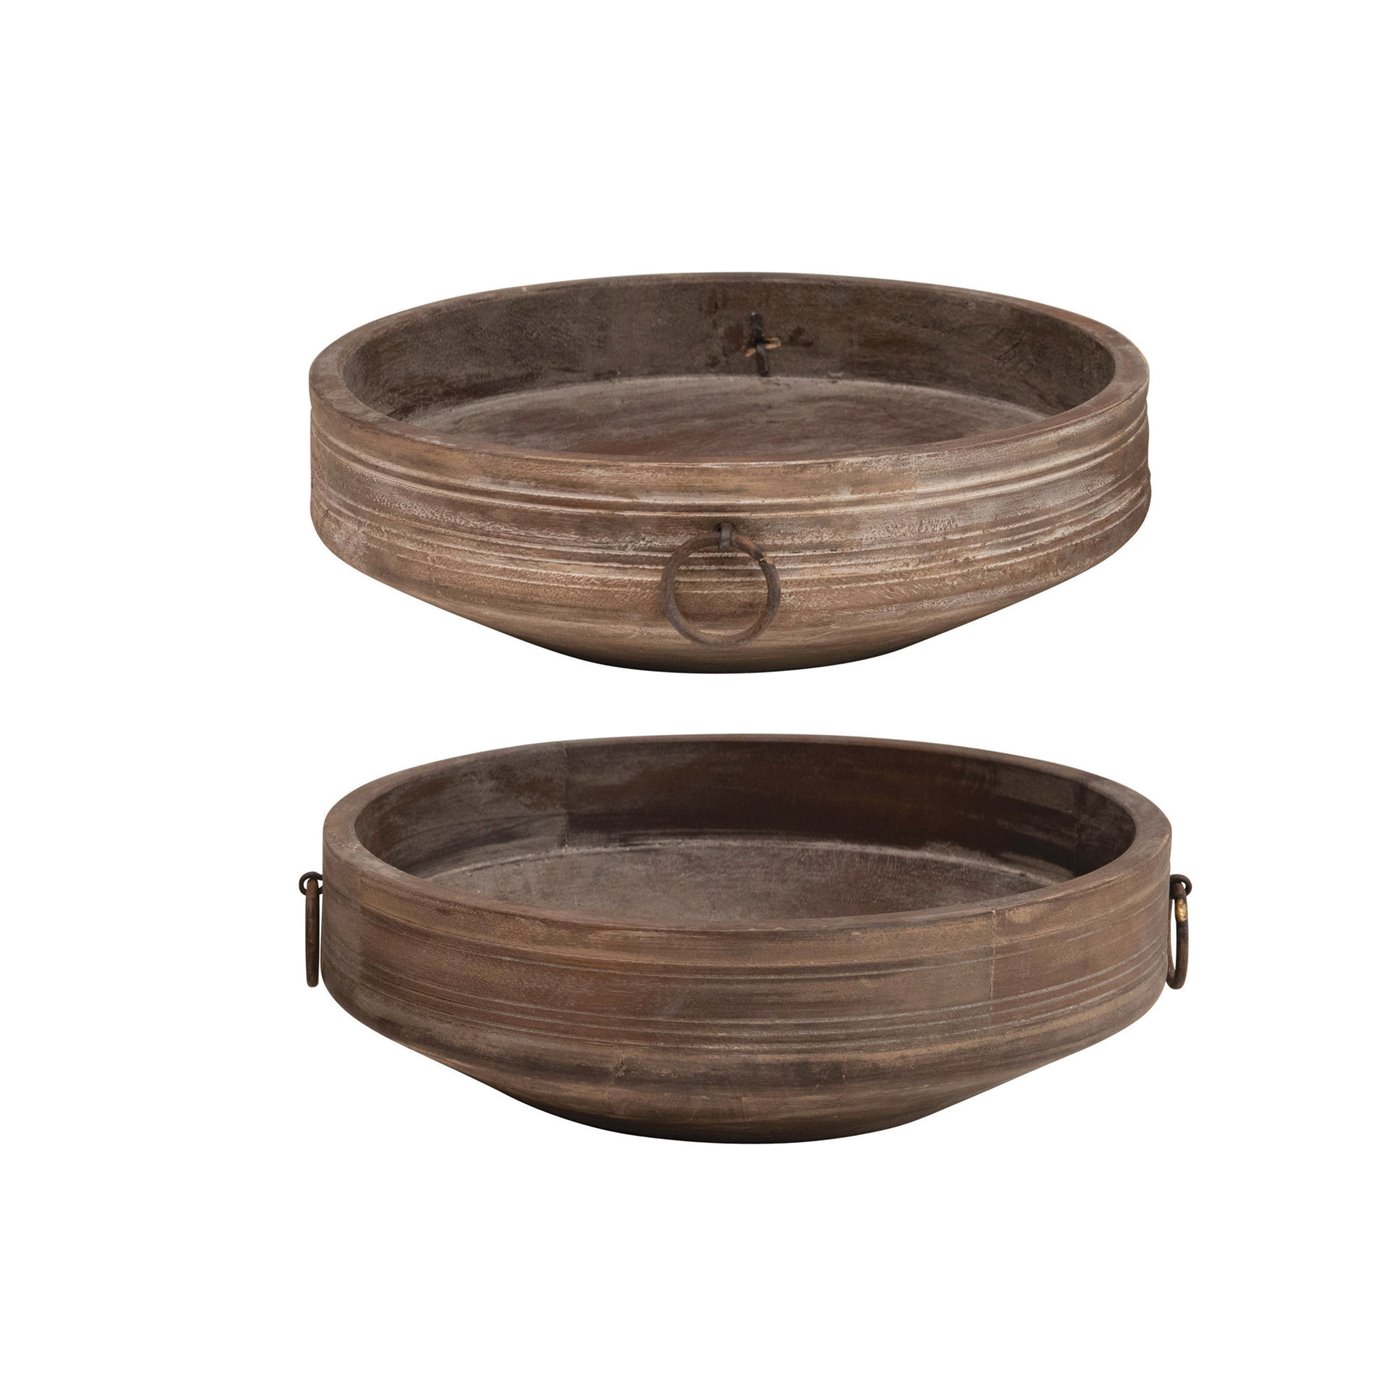 Found Decorative Reclaimed Wood Bowl